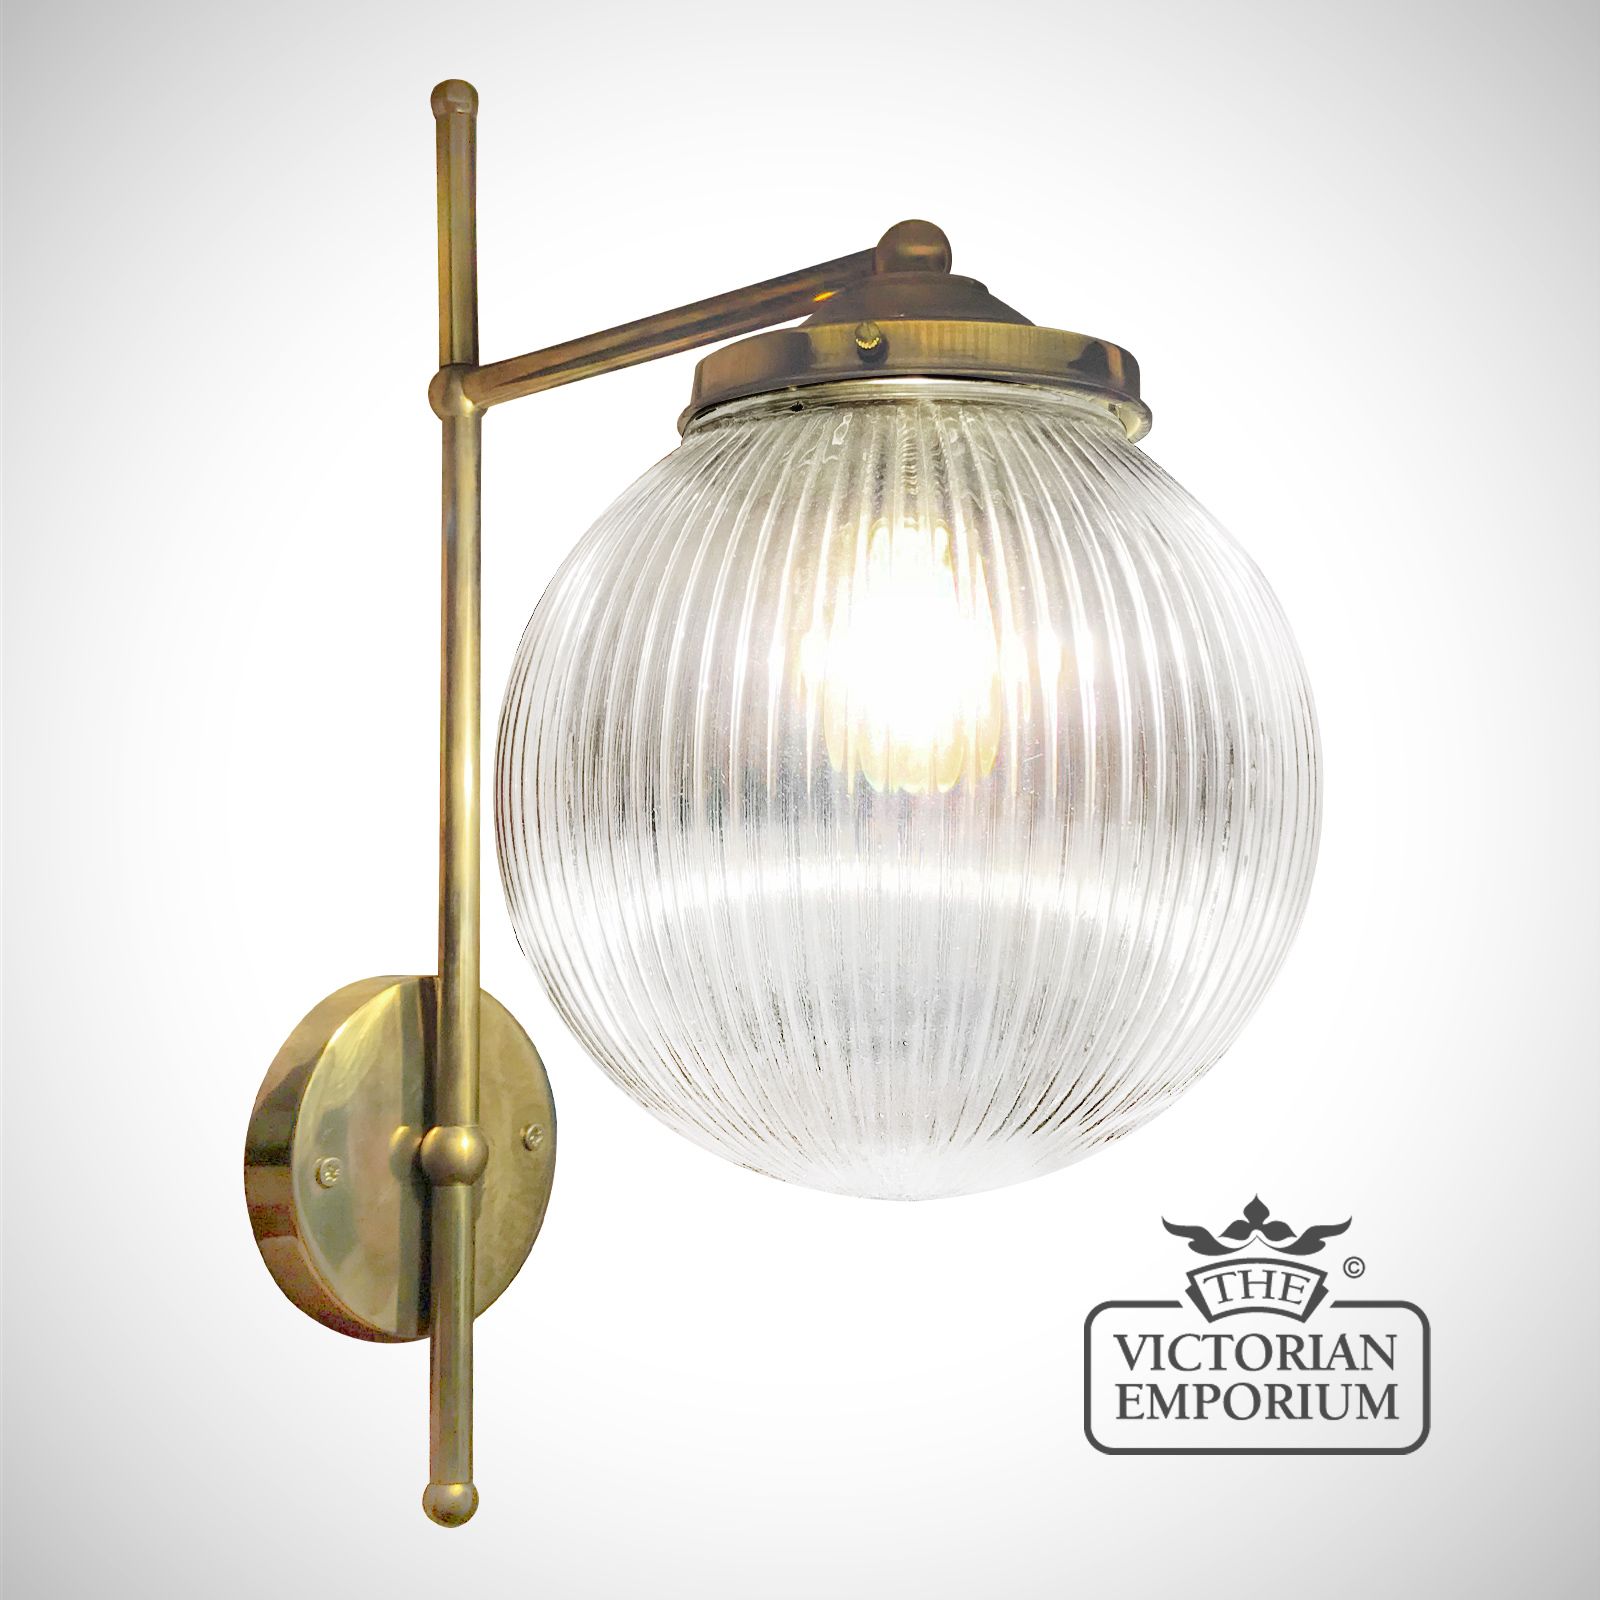 T Bracket Single Globe Wall Light - featuring a prismatic reeded glass shade and a distressed brass finished bracket